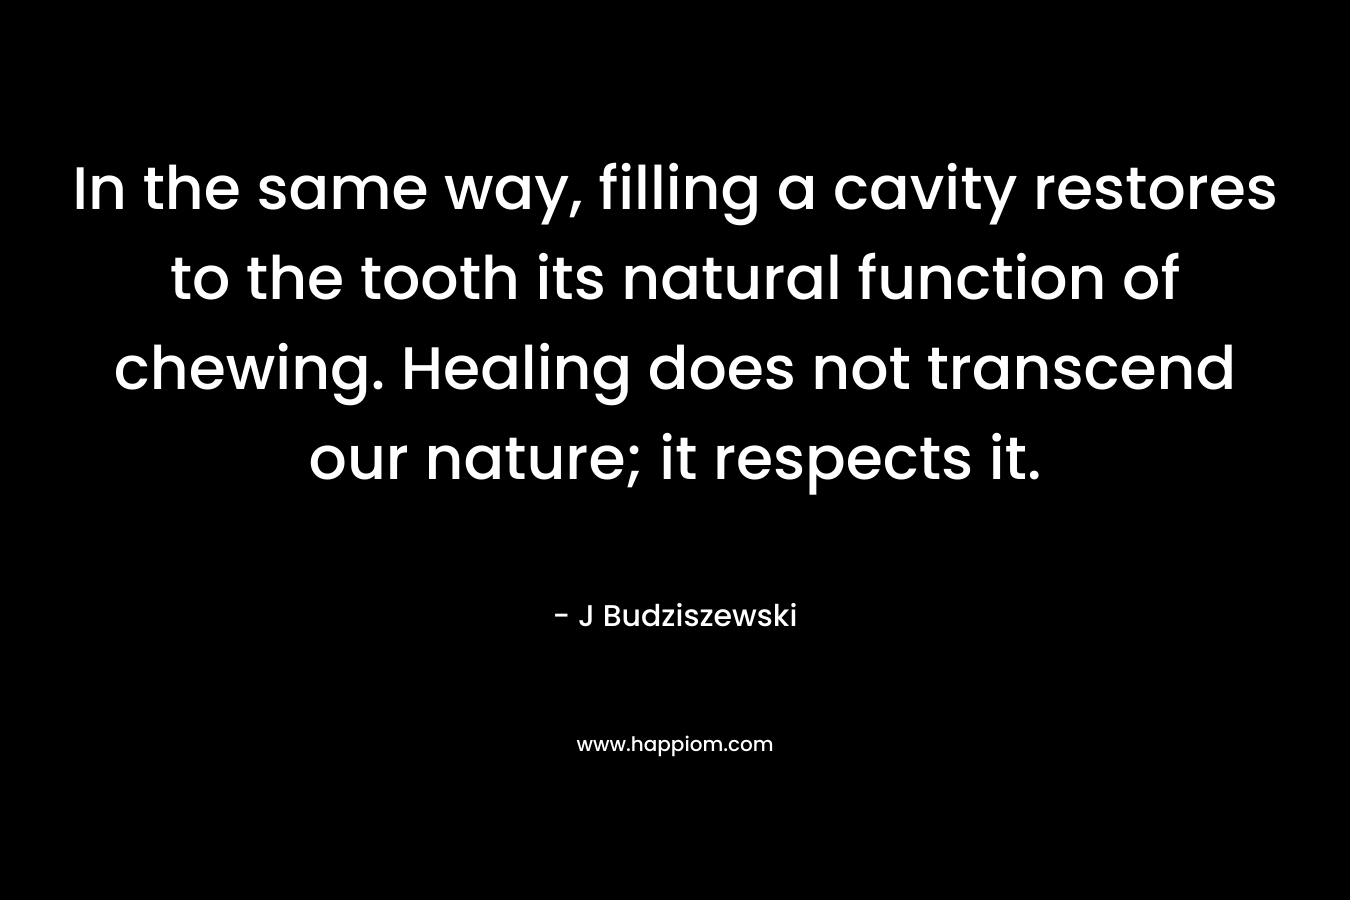 In the same way, filling a cavity restores to the tooth its natural function of chewing. Healing does not transcend our nature; it respects it. – J Budziszewski